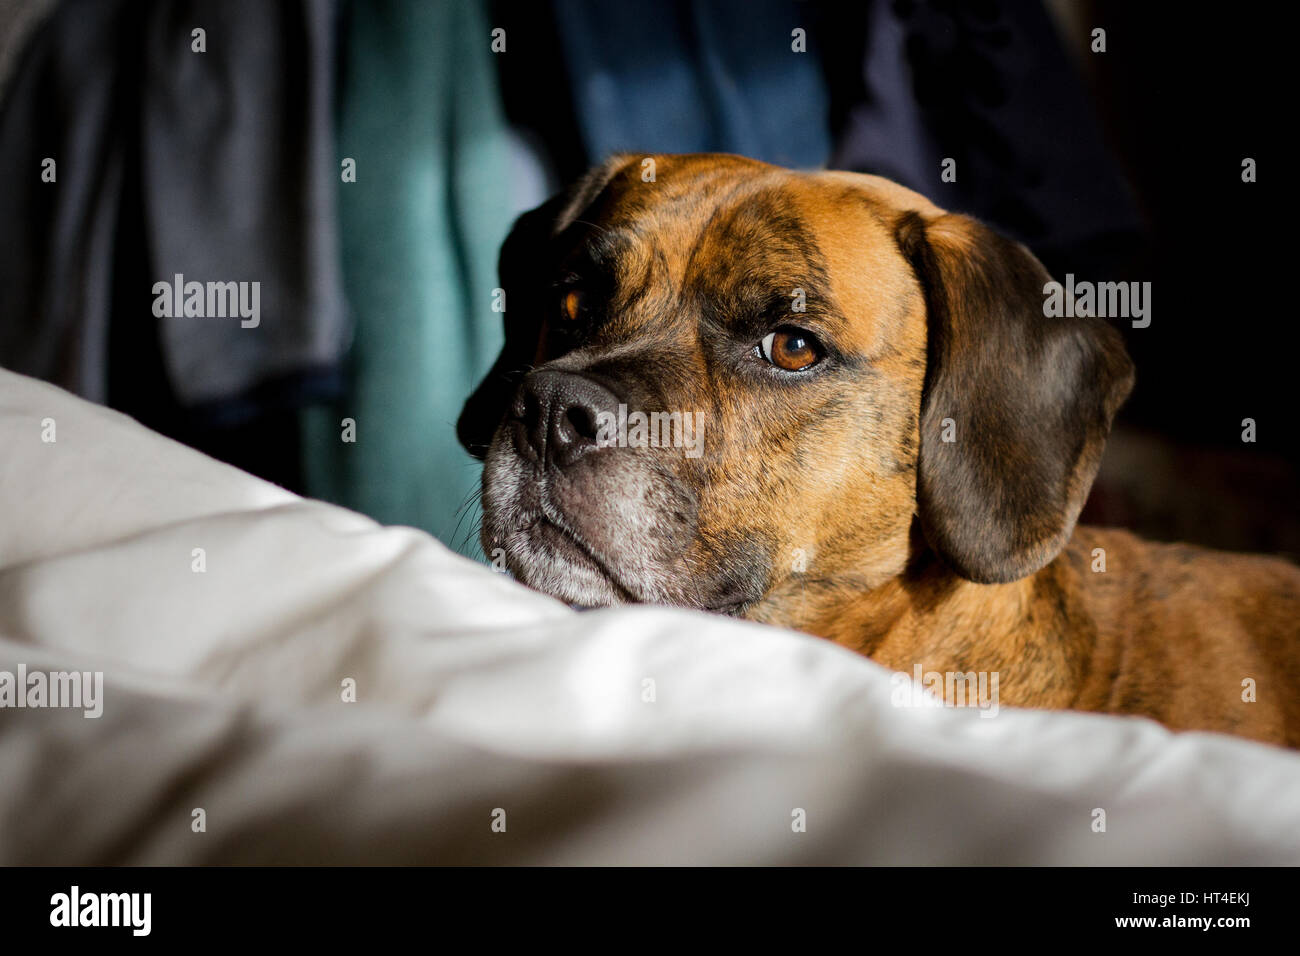 Cute Cheeky Pet Dog Looking at Camera in home Stock Photo